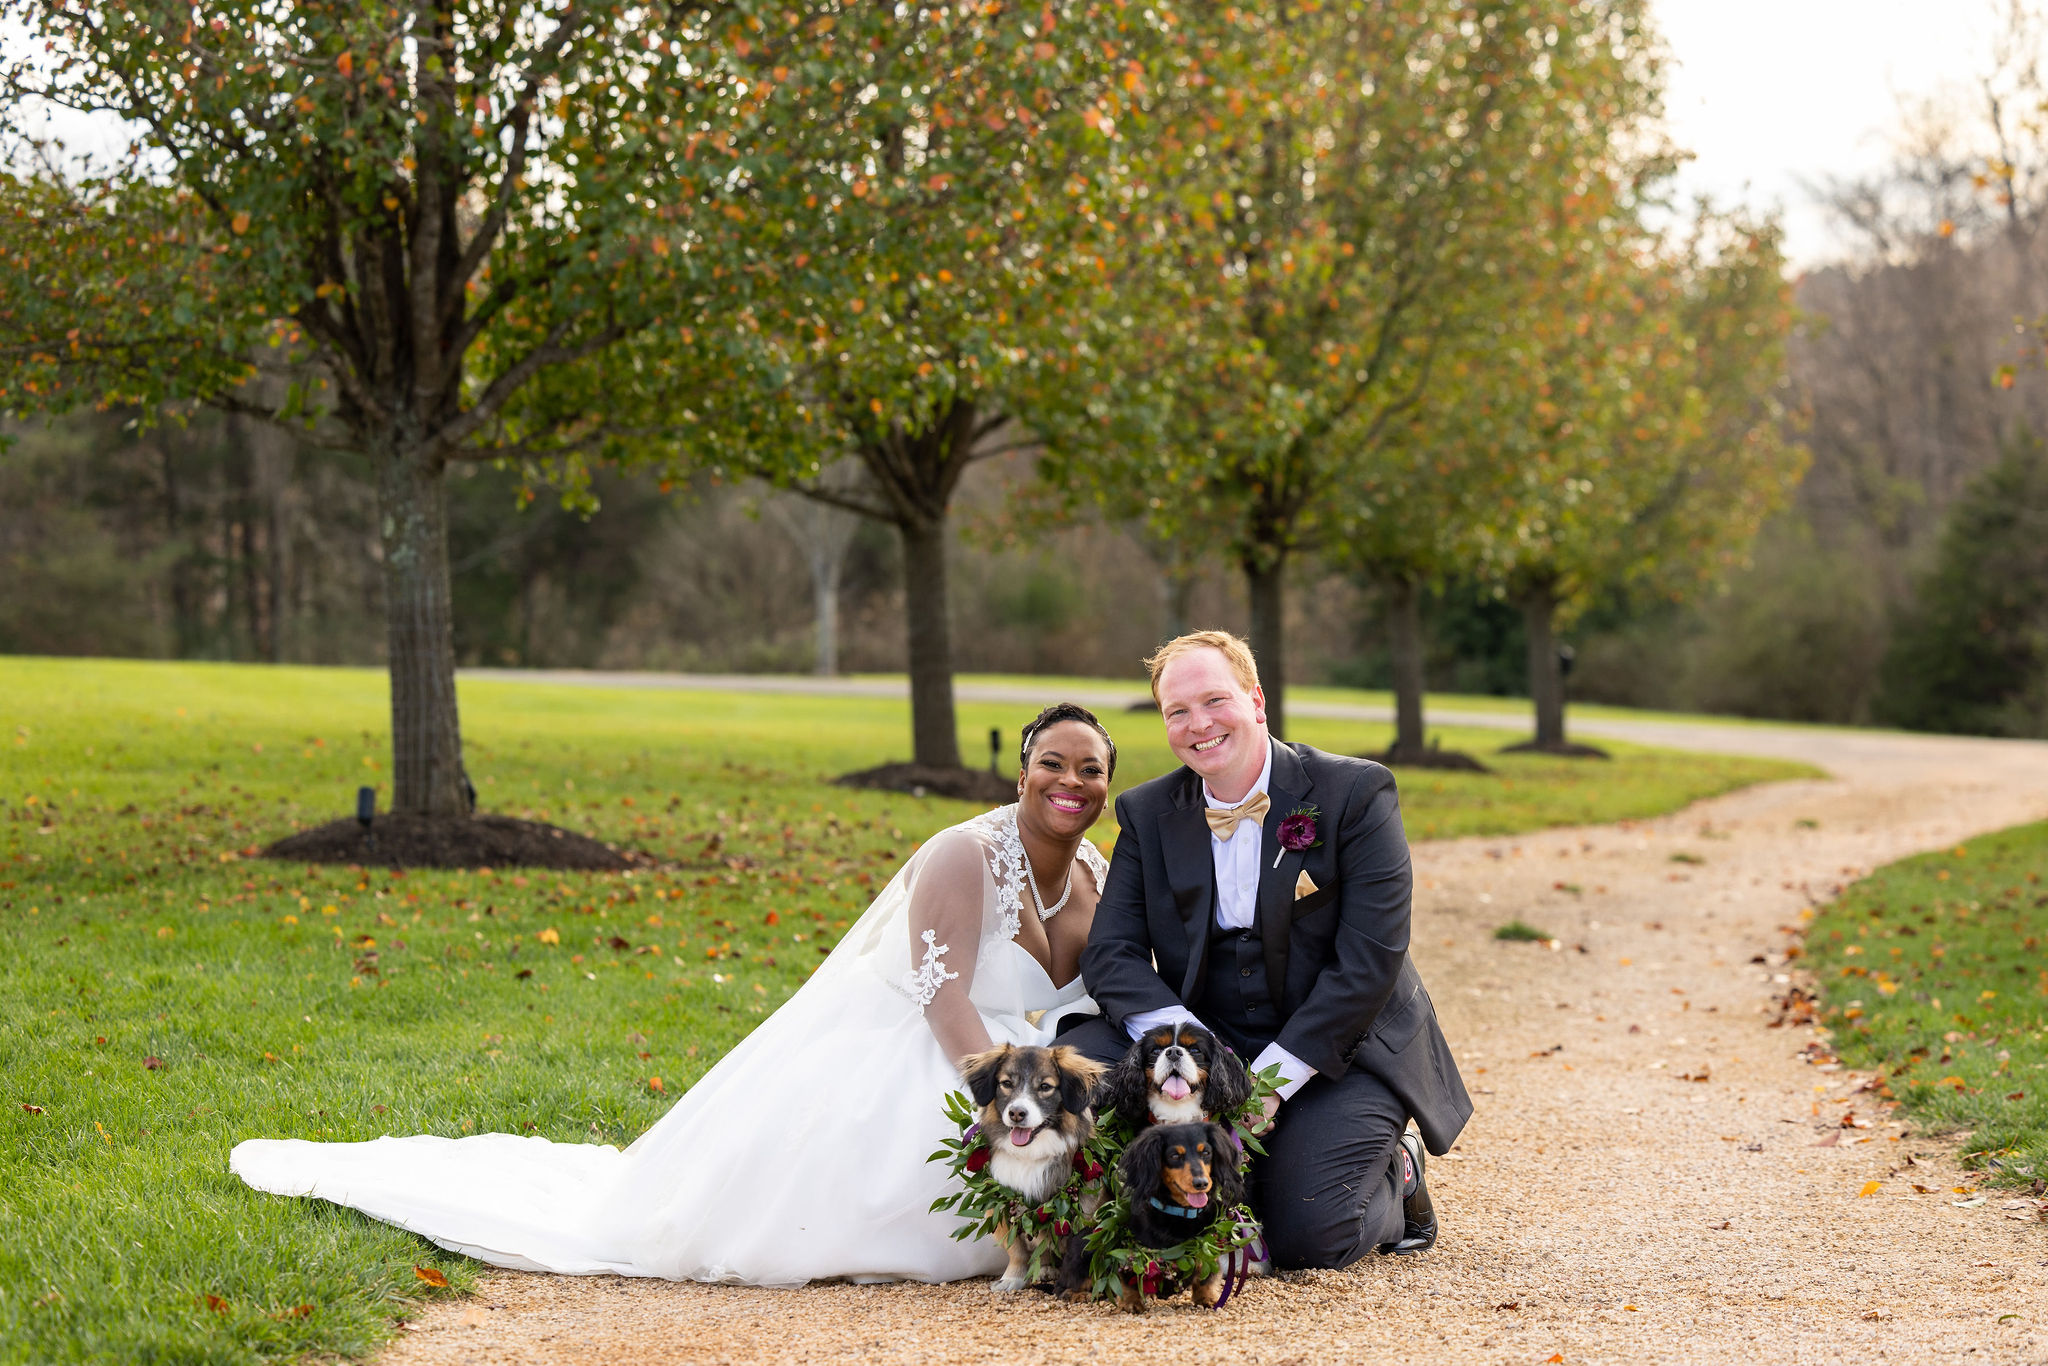 bride and groom take picture woth dogs on wedding day